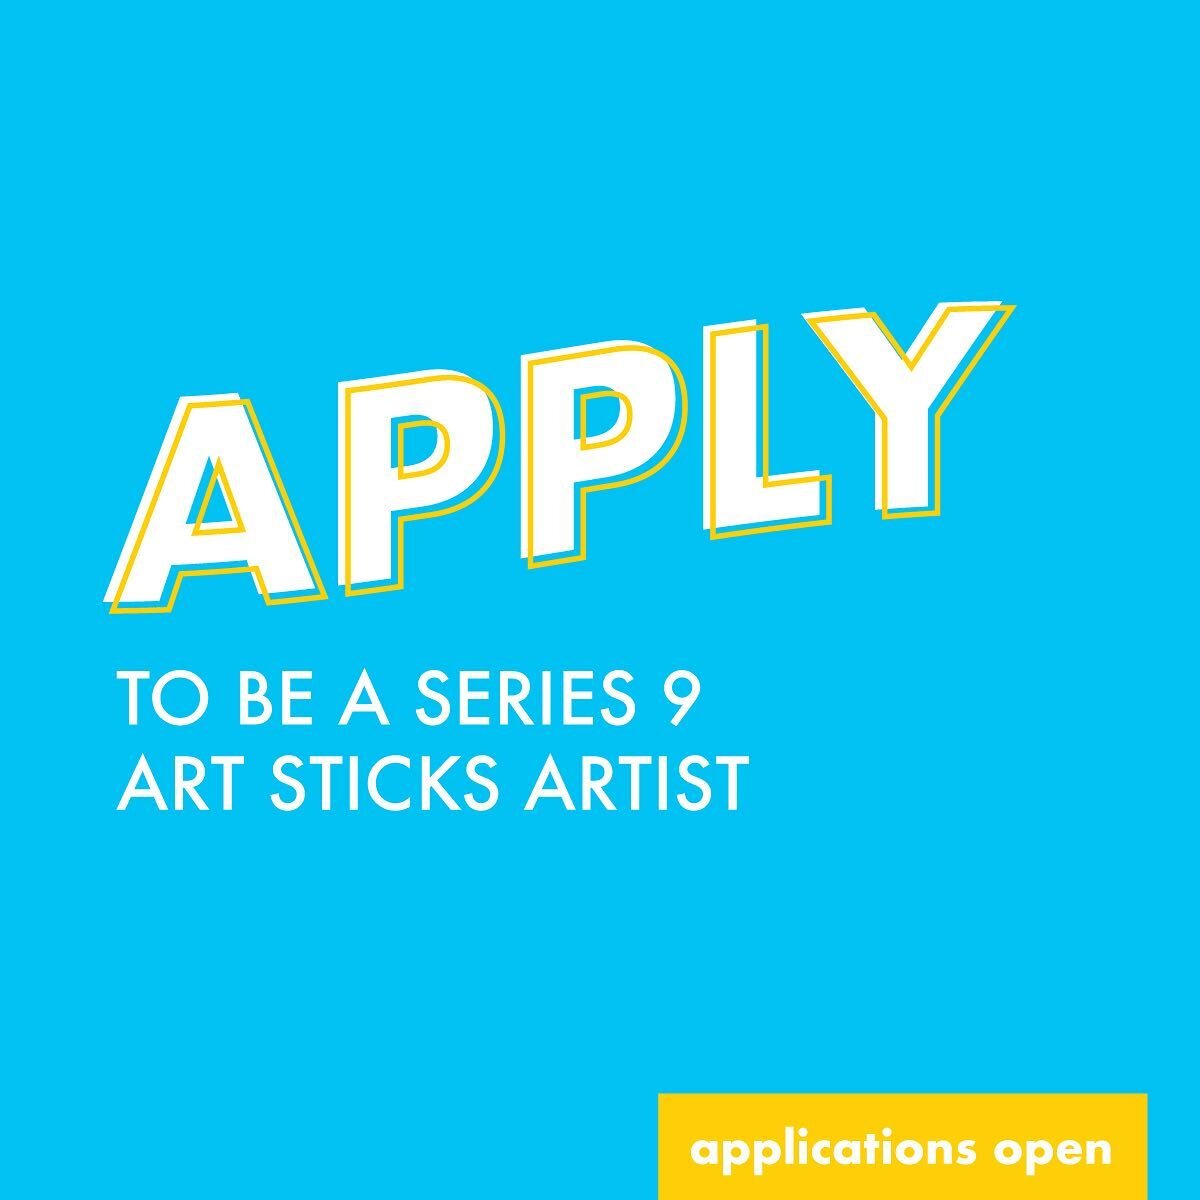 Our Series 9 artist submissions are now open! Apply to be an artist in the upcoming Art Sticks Series. Applications due by May 31st. Submission details in link in bio.